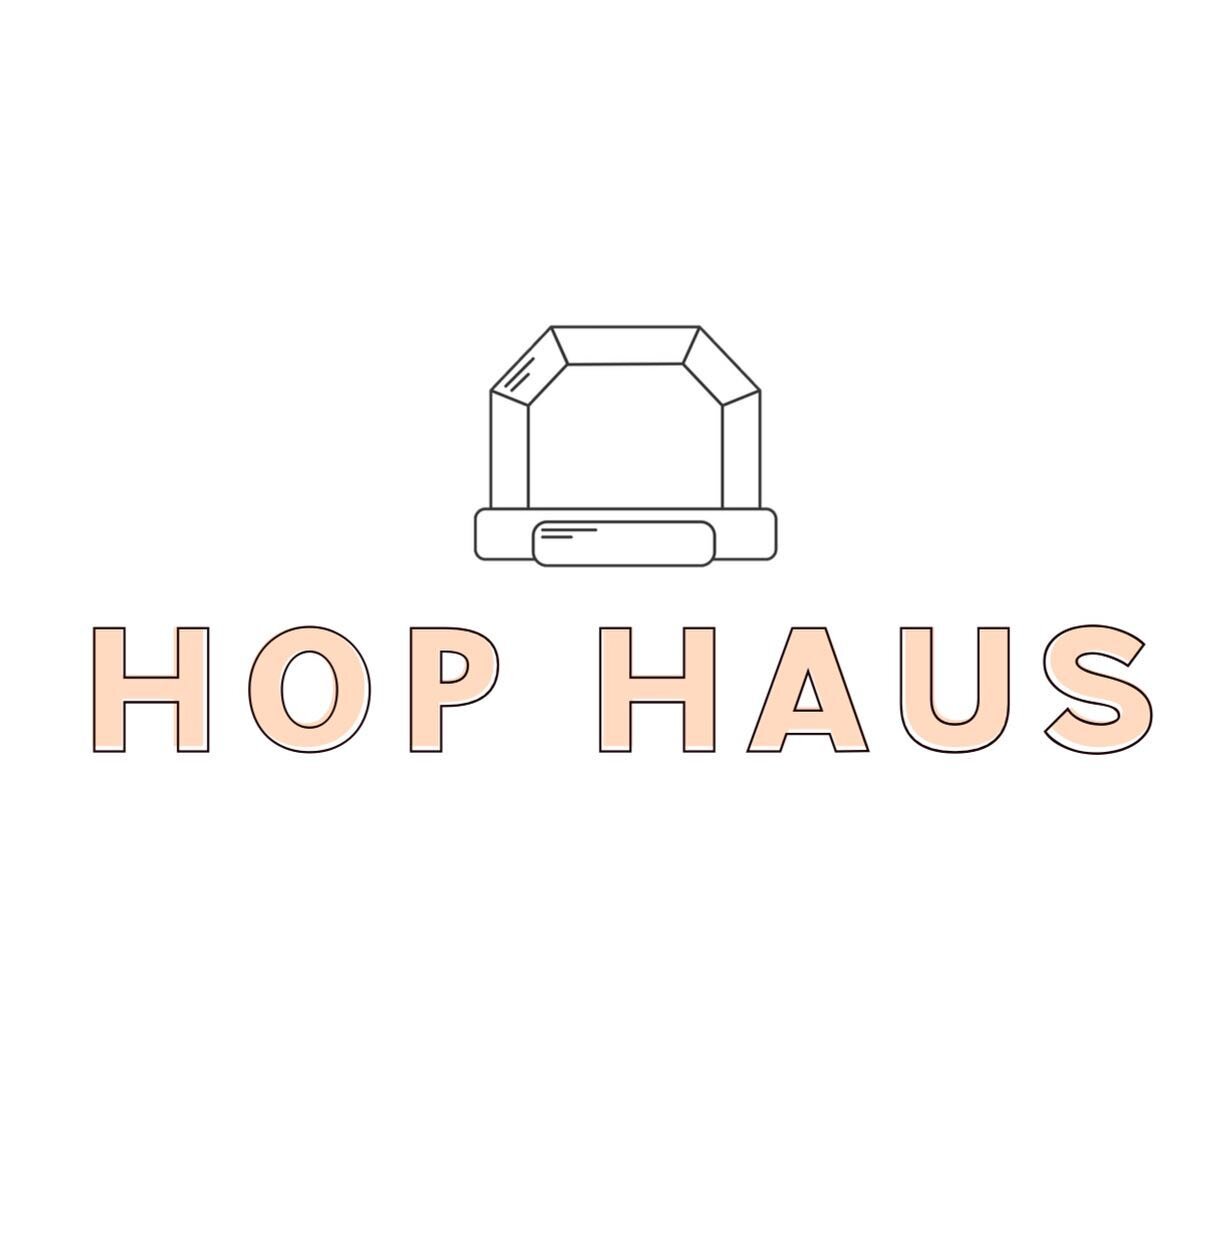 Hello! Hop Haus here. Who is ready to party with us?! Minnesota&rsquo;s first modern bounce house rental company has arrived and is launching soon. Finally, neutral tones for any type of party. Our custom made white and peach hop haus&rsquo; are in t